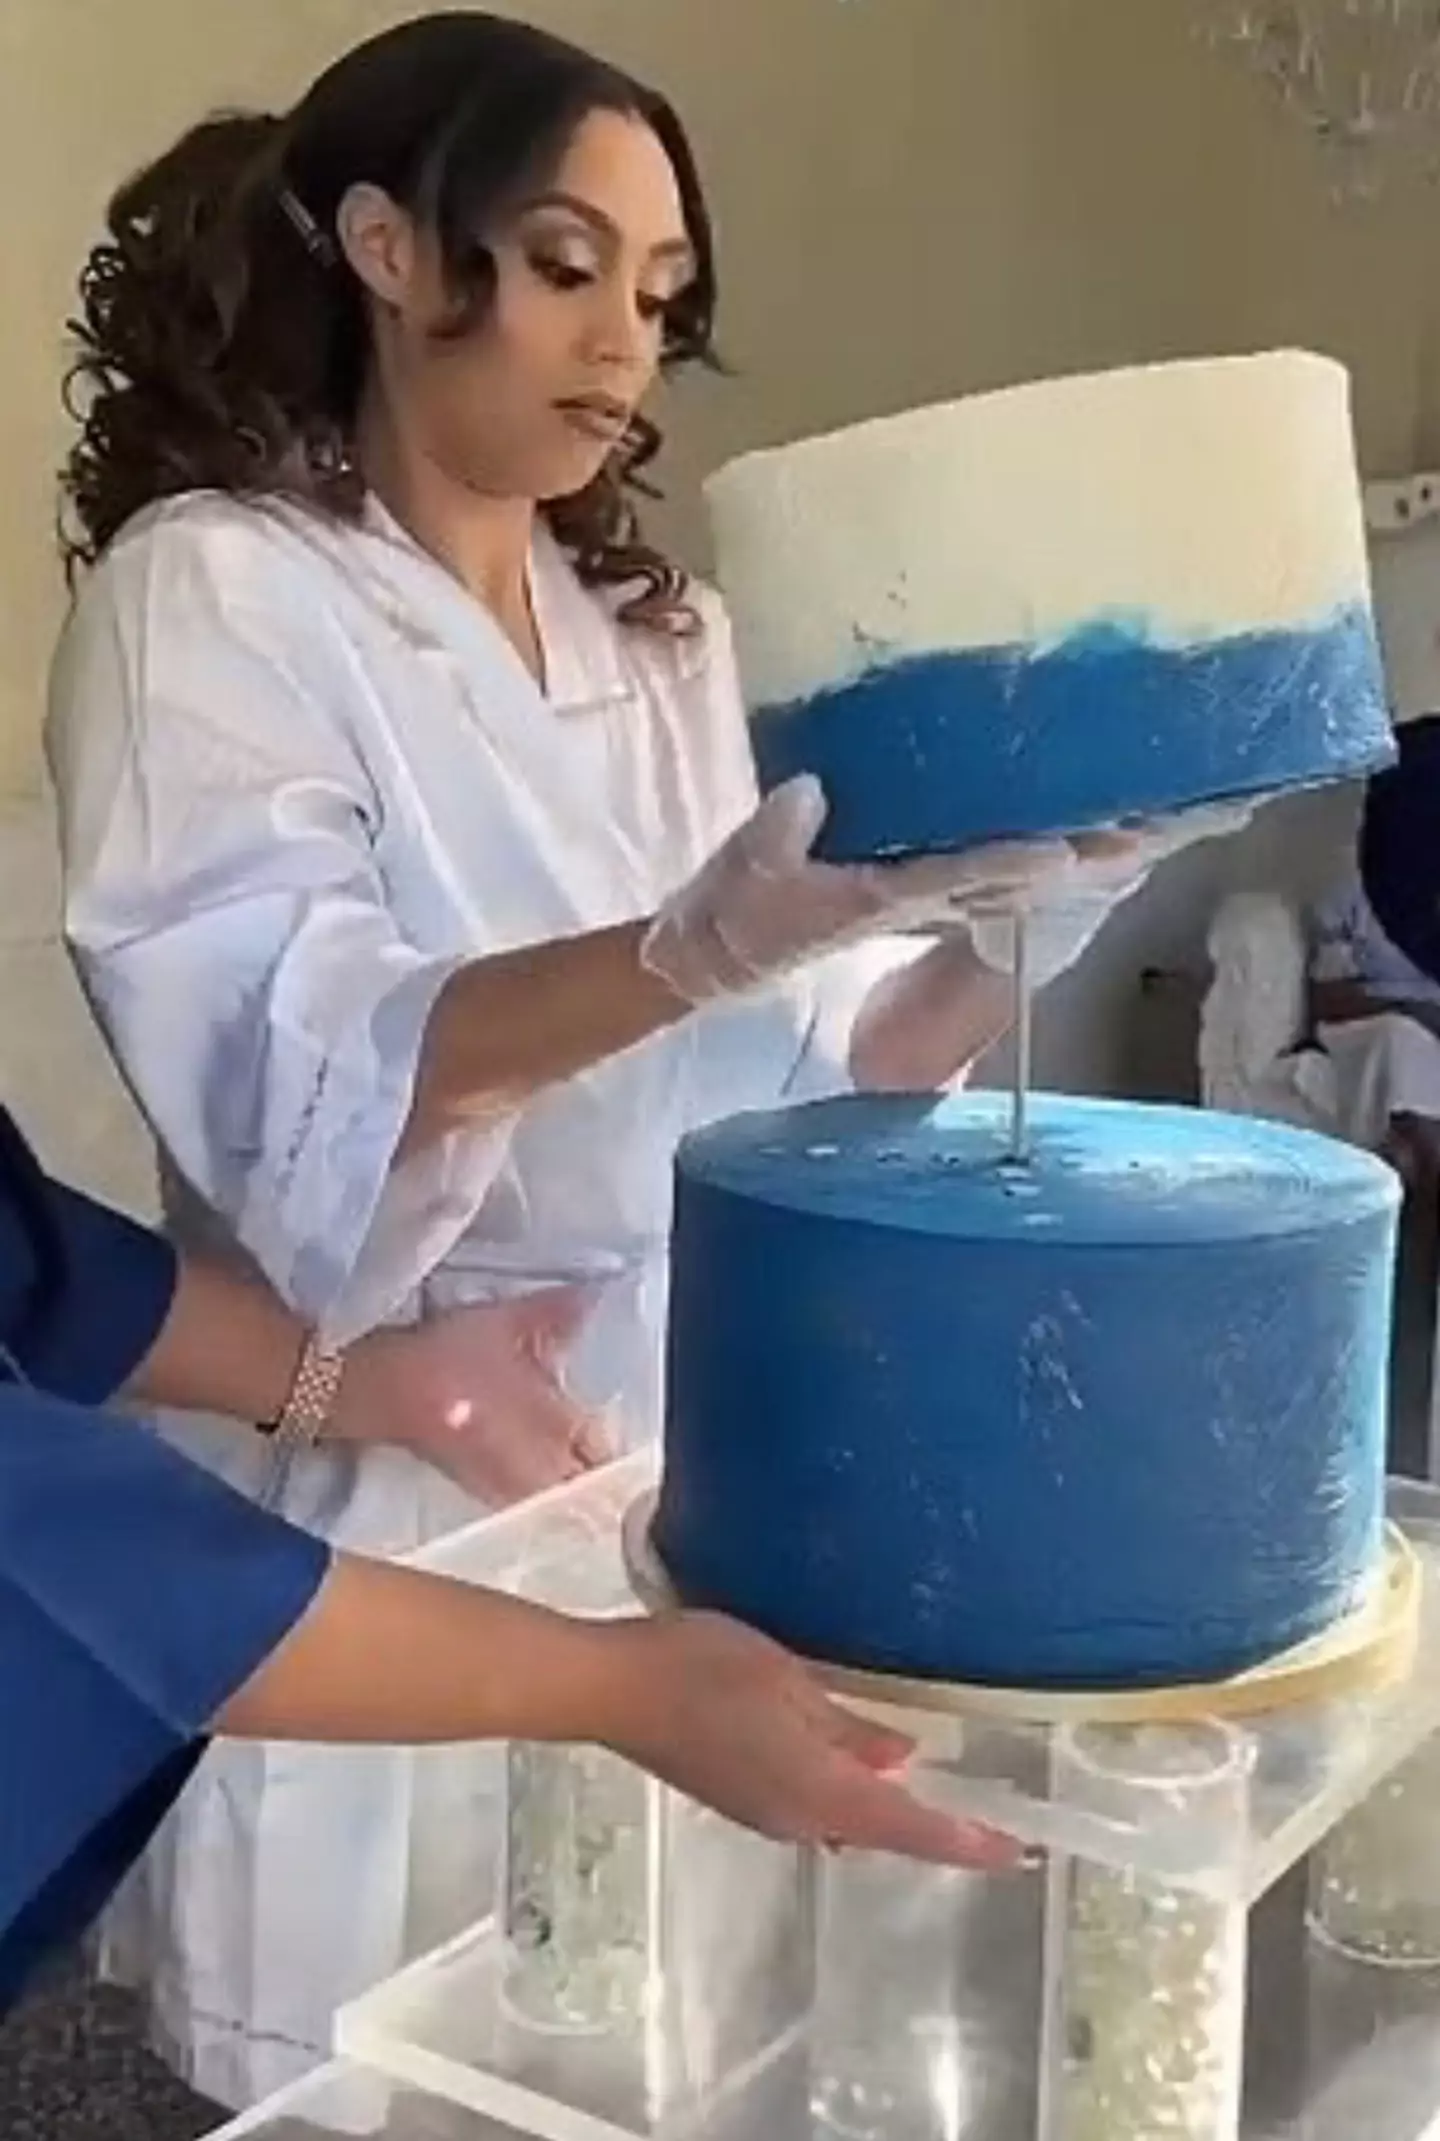 The pastry chef decided to make her own wedding cake.